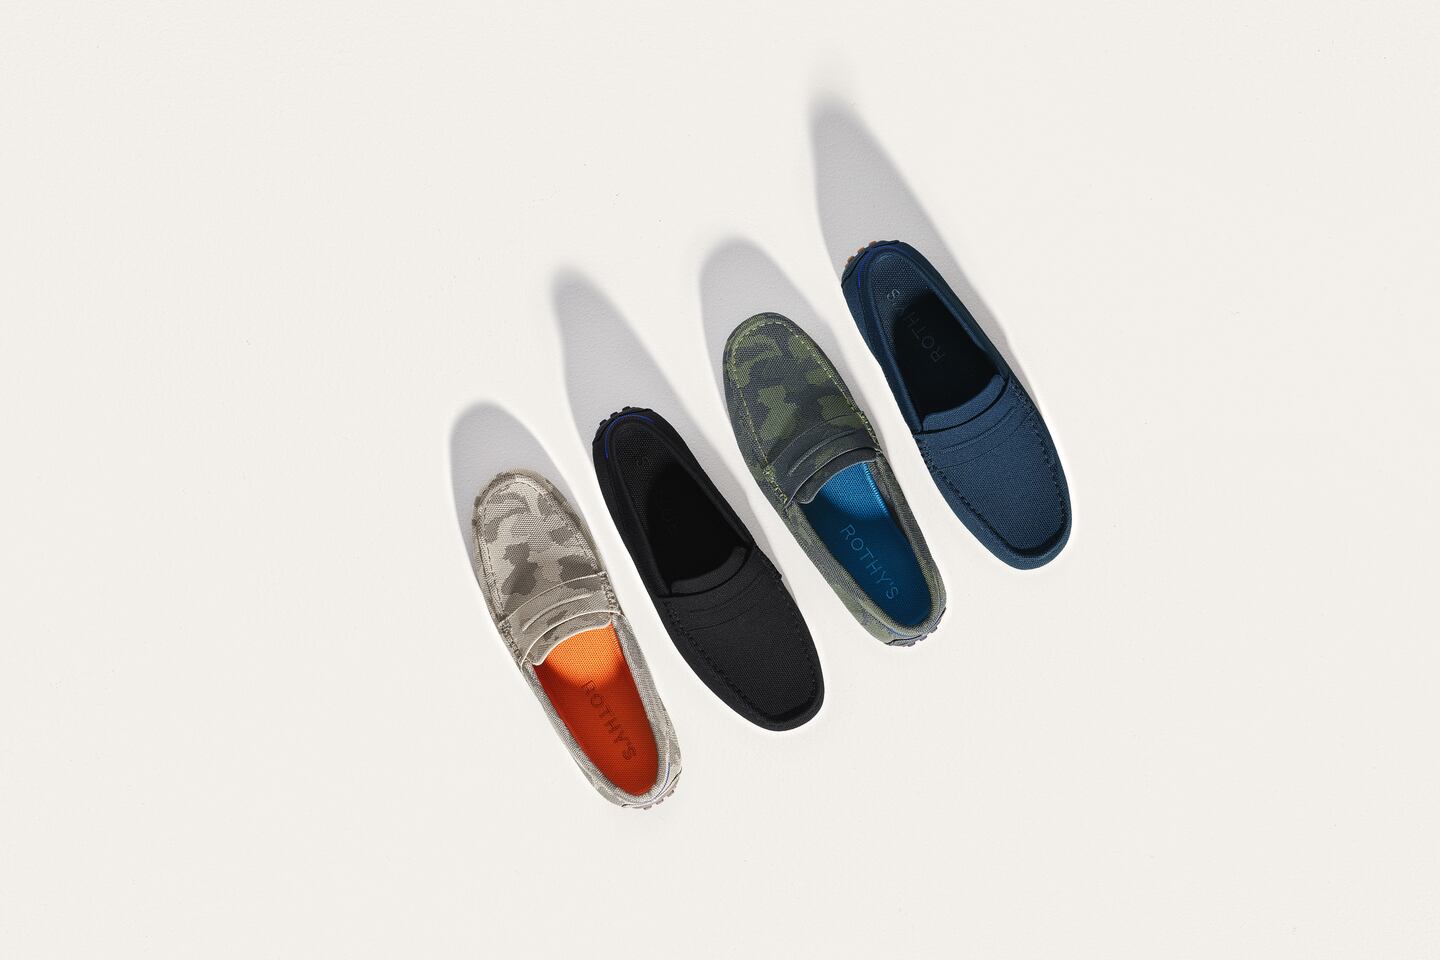 Rothy's loafers are made from recycled plastic bottles.